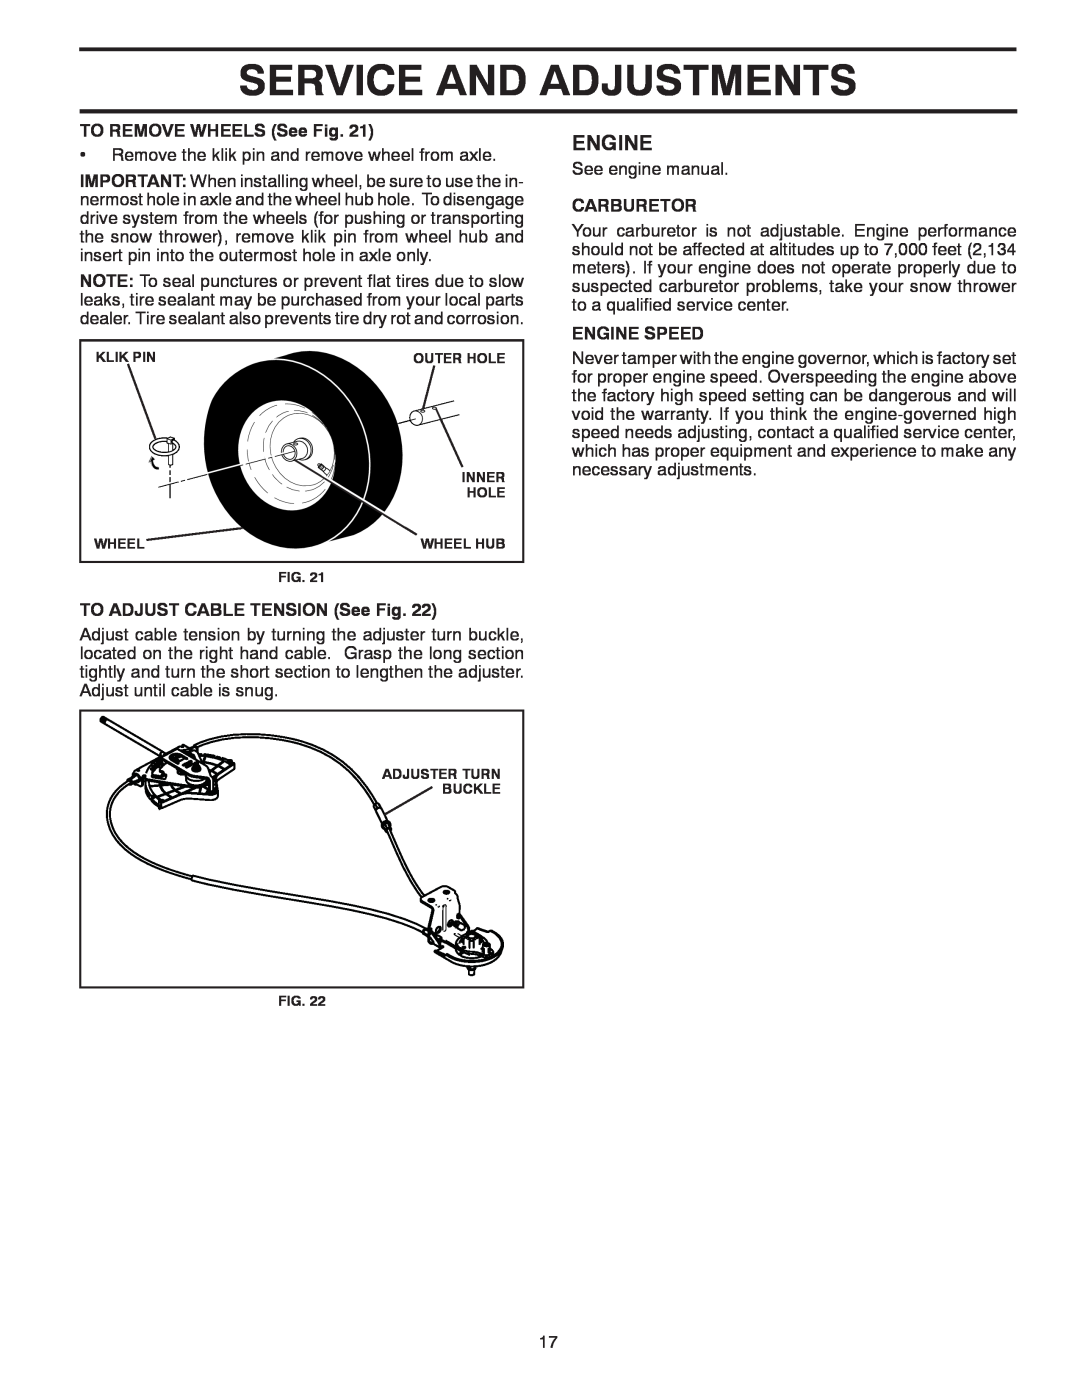 Poulan 96192002901 Service And Adjustments, Engine, TO REMOVE WHEELS See Fig, TO ADJUST CABLE TENSION See Fig, Carburetor 